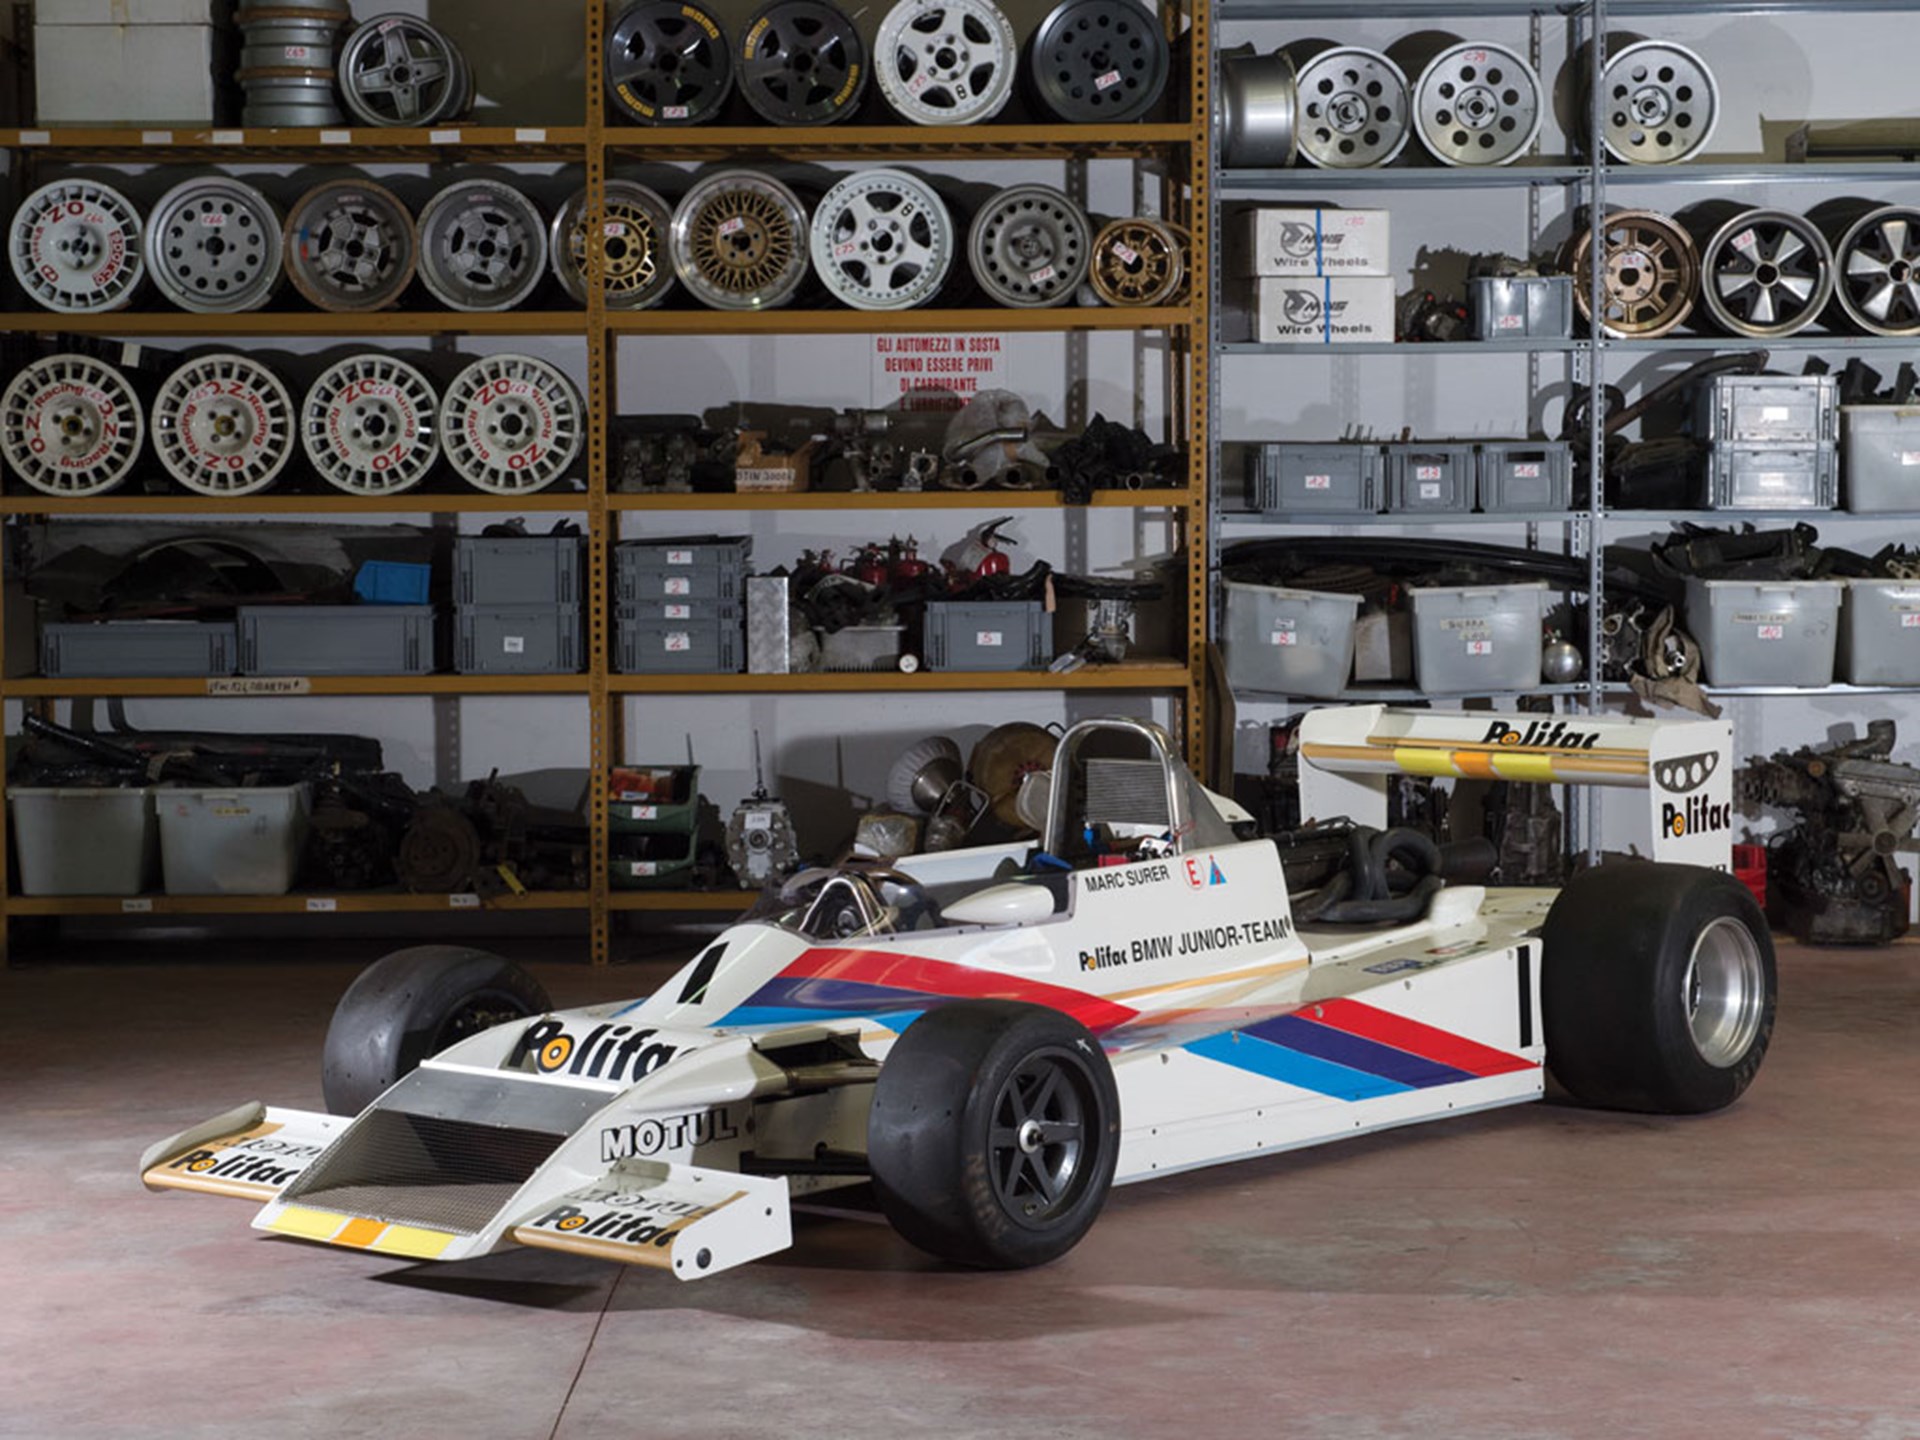 1979 March BMW 792 Formula 2 | Duemila Ruote | RM  Sotheby's                                        1979 March BMW 792 Formula 2 | Duemila Ruote | RM  Sotheby's                                                    1979 March BMW 792 Formula 2You may also like: